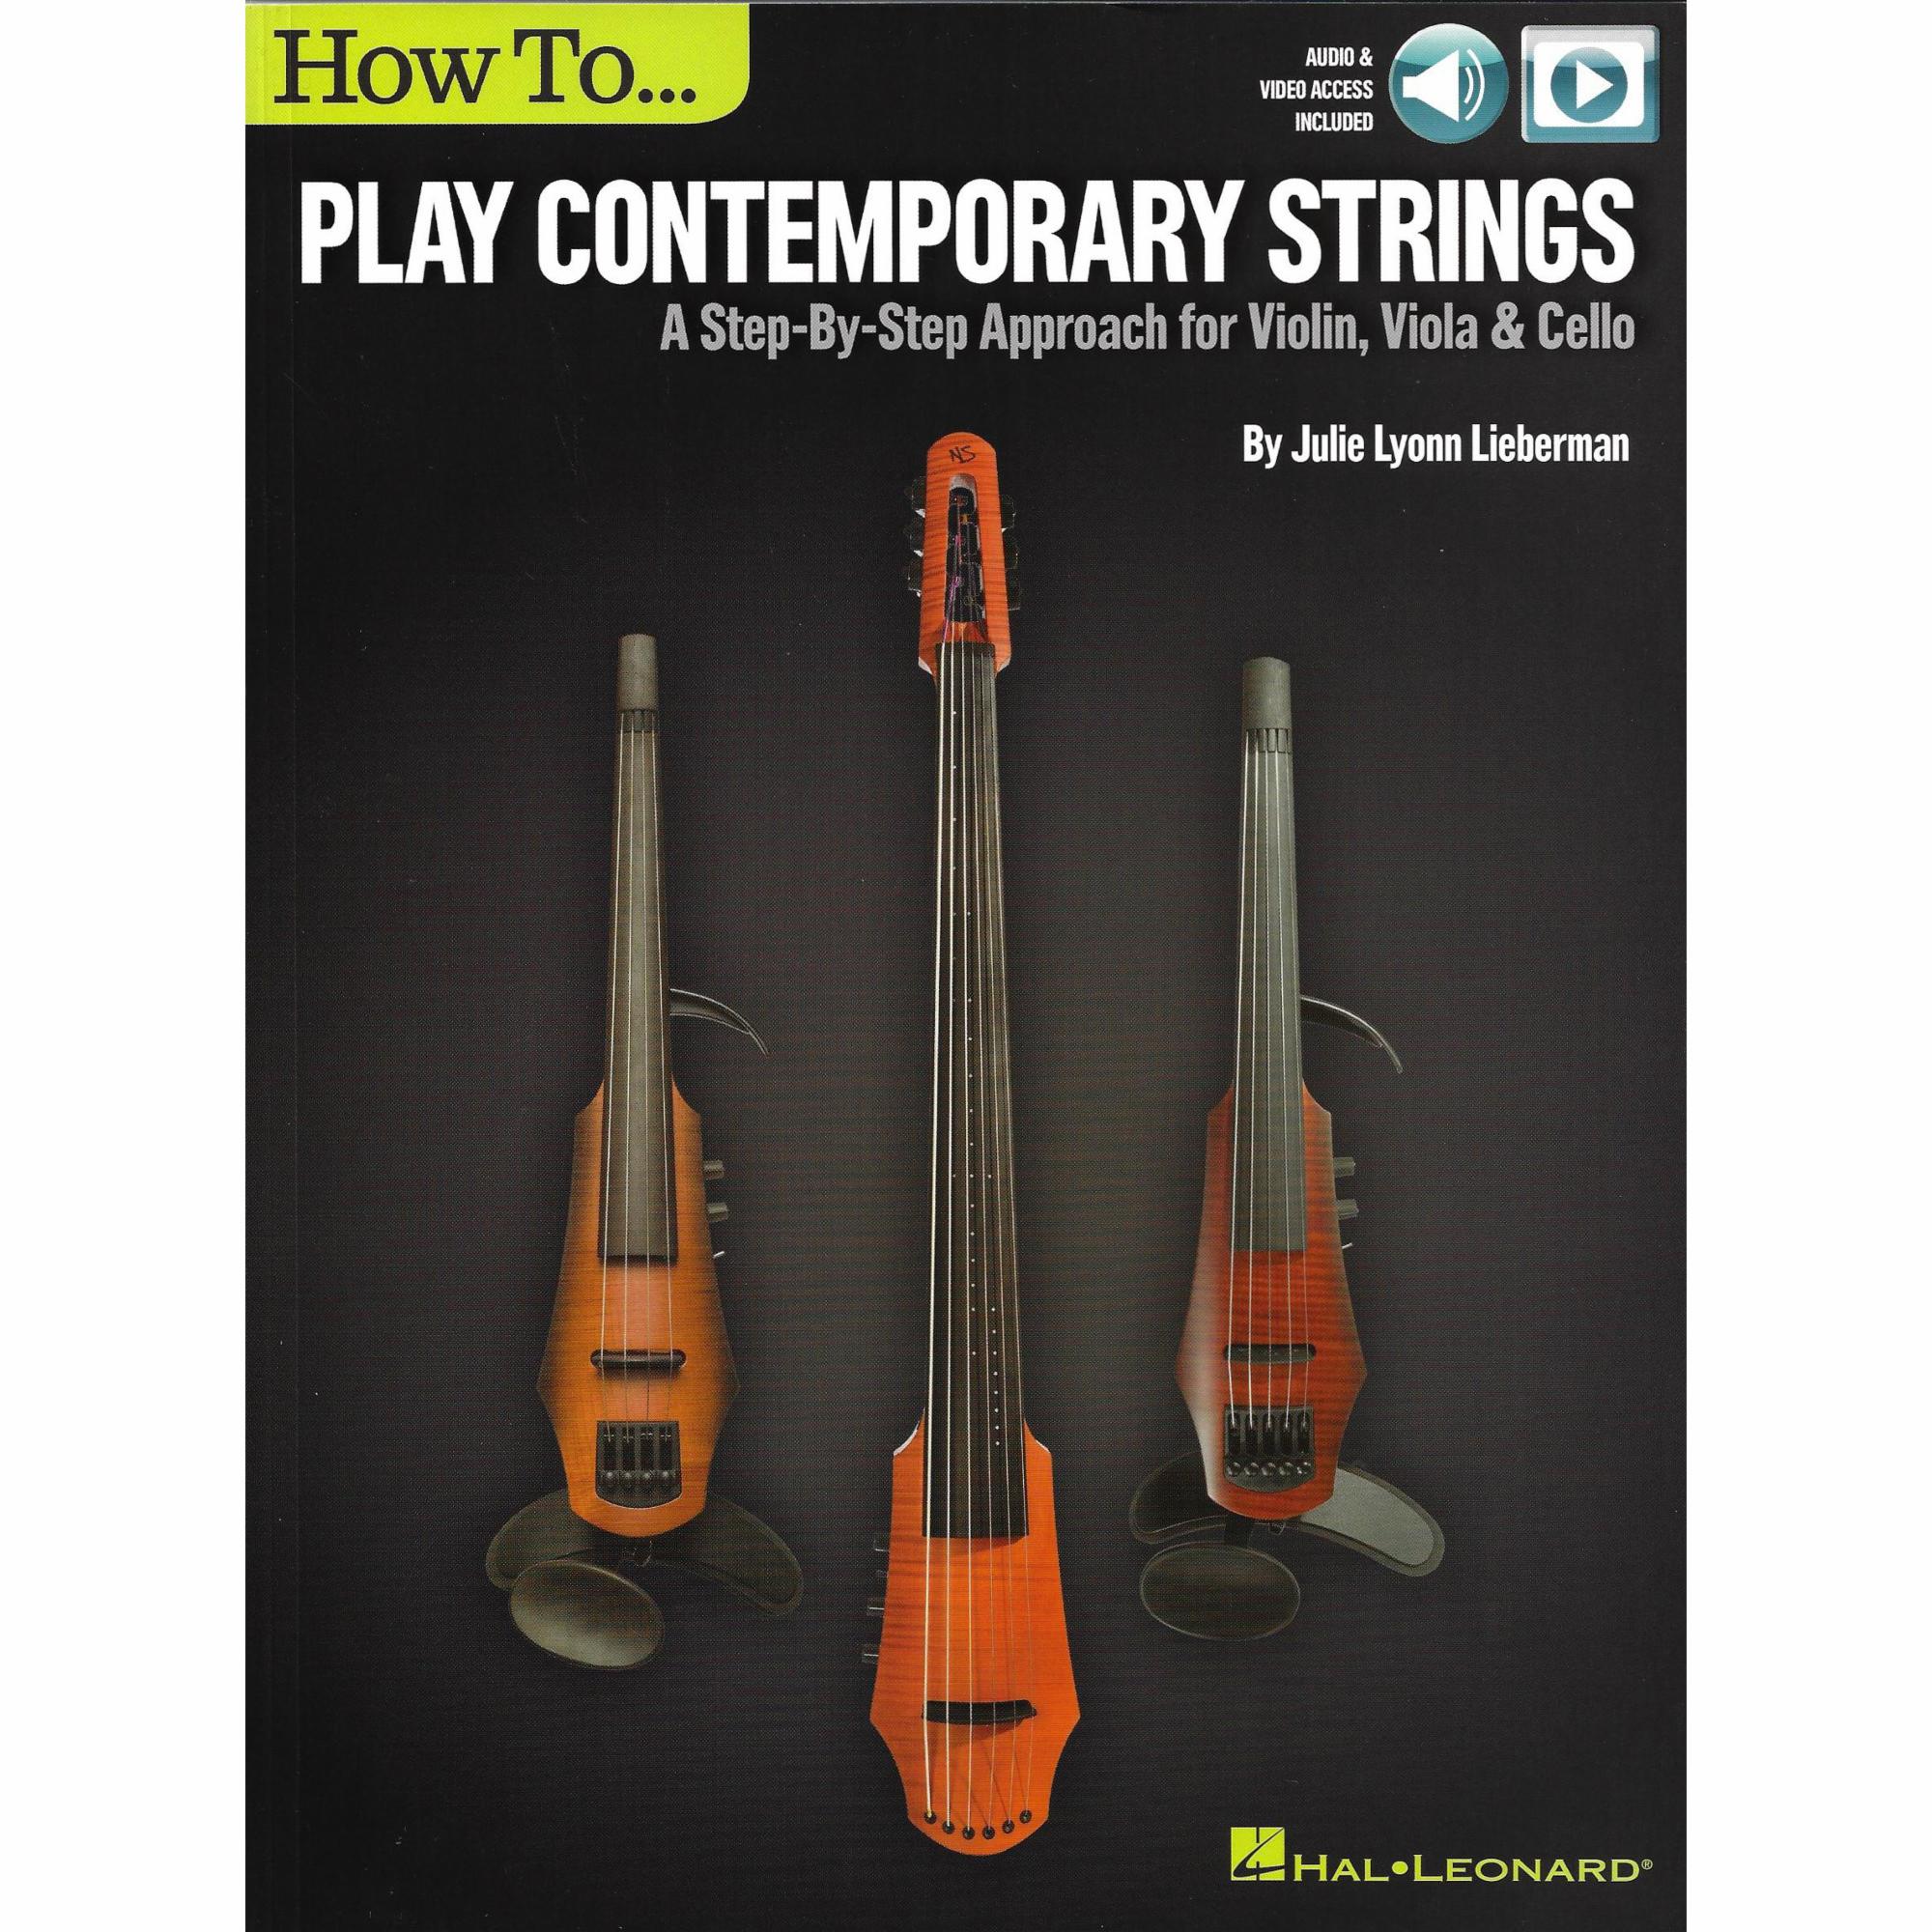 How to Play Contemporary Strings for Violin, Viola, or Cello